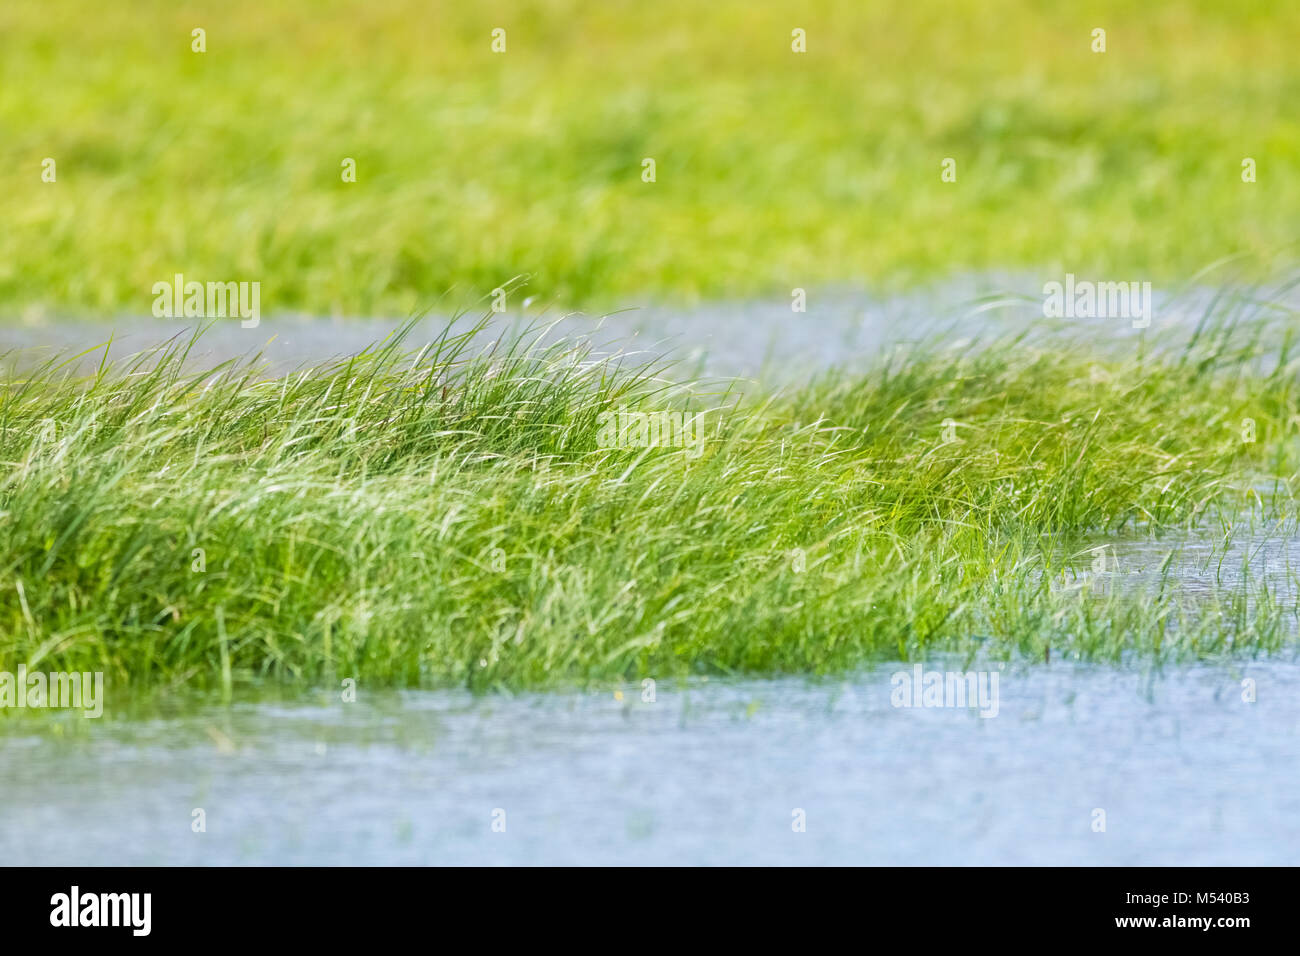 grass beauty in lake Stock Photo